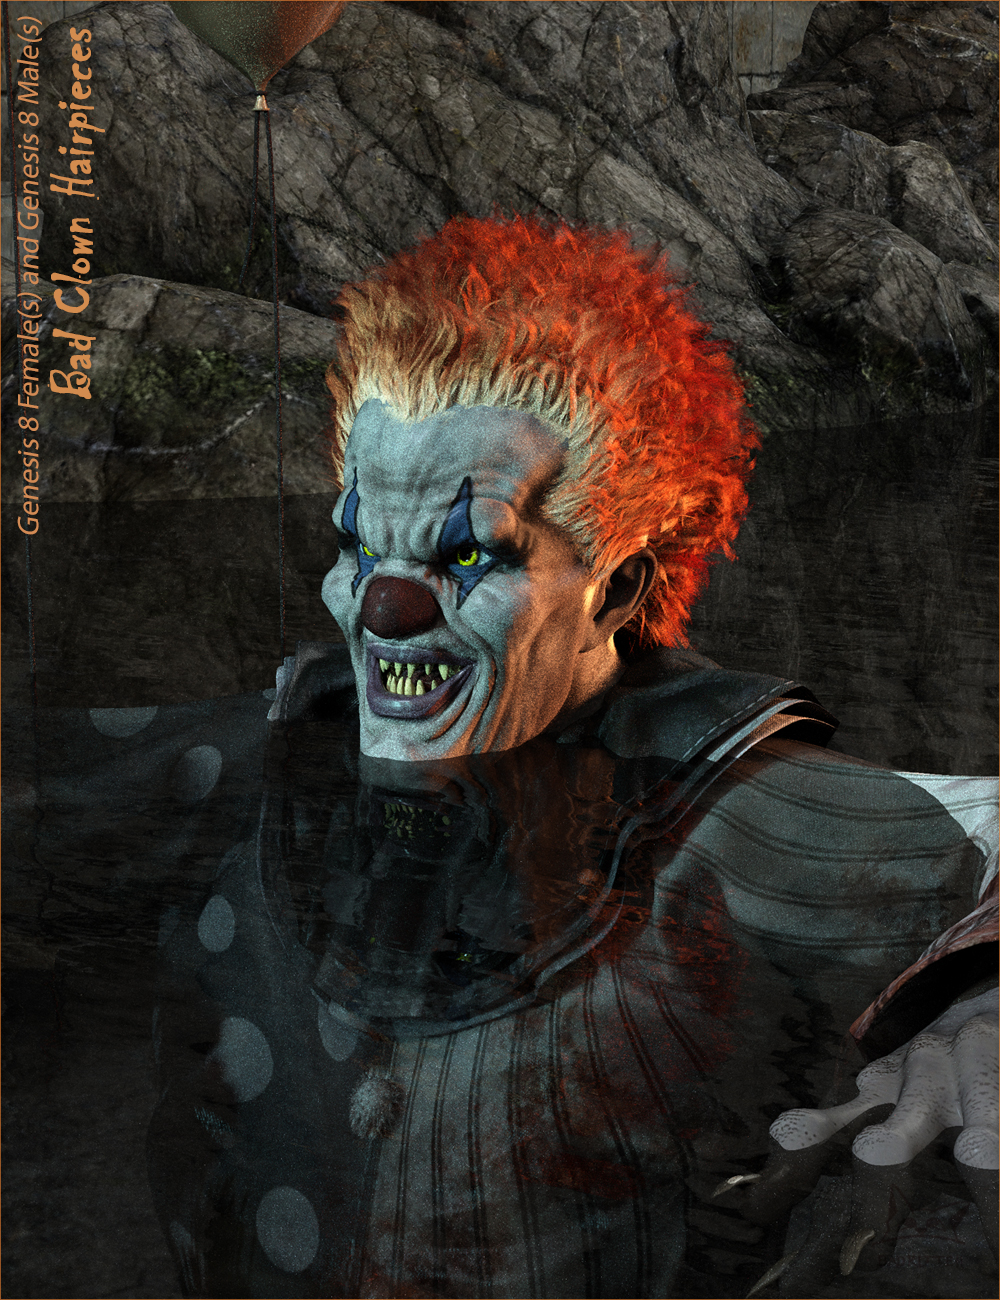 Bad Clown Hairpieces for Genesis 8 Male(s) and Female(s) by: BadKitteh Co, 3D Models by Daz 3D